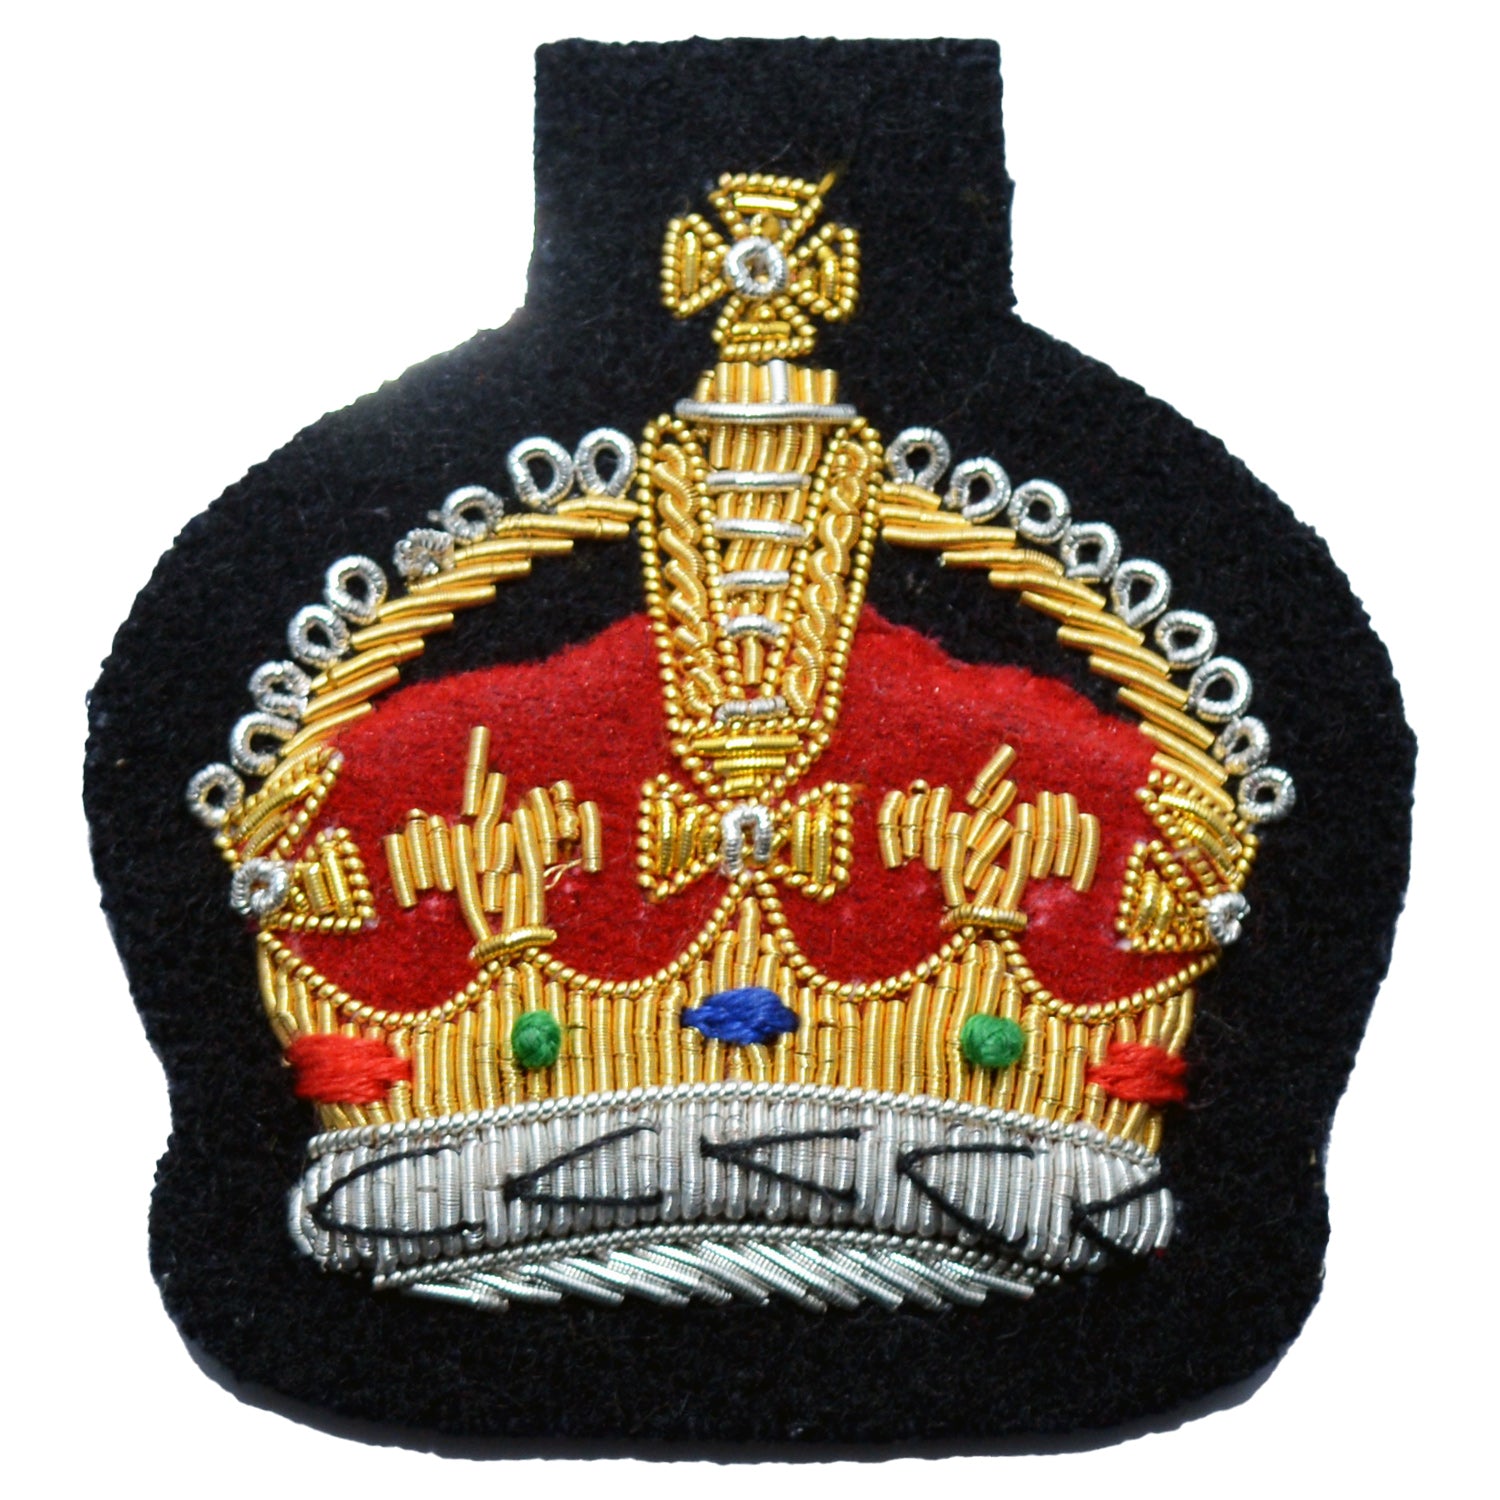 (Kings Crown) QMS, CSgt and SSgt Small Crown Rank Badge Royal Tank Regiment NCO British Army